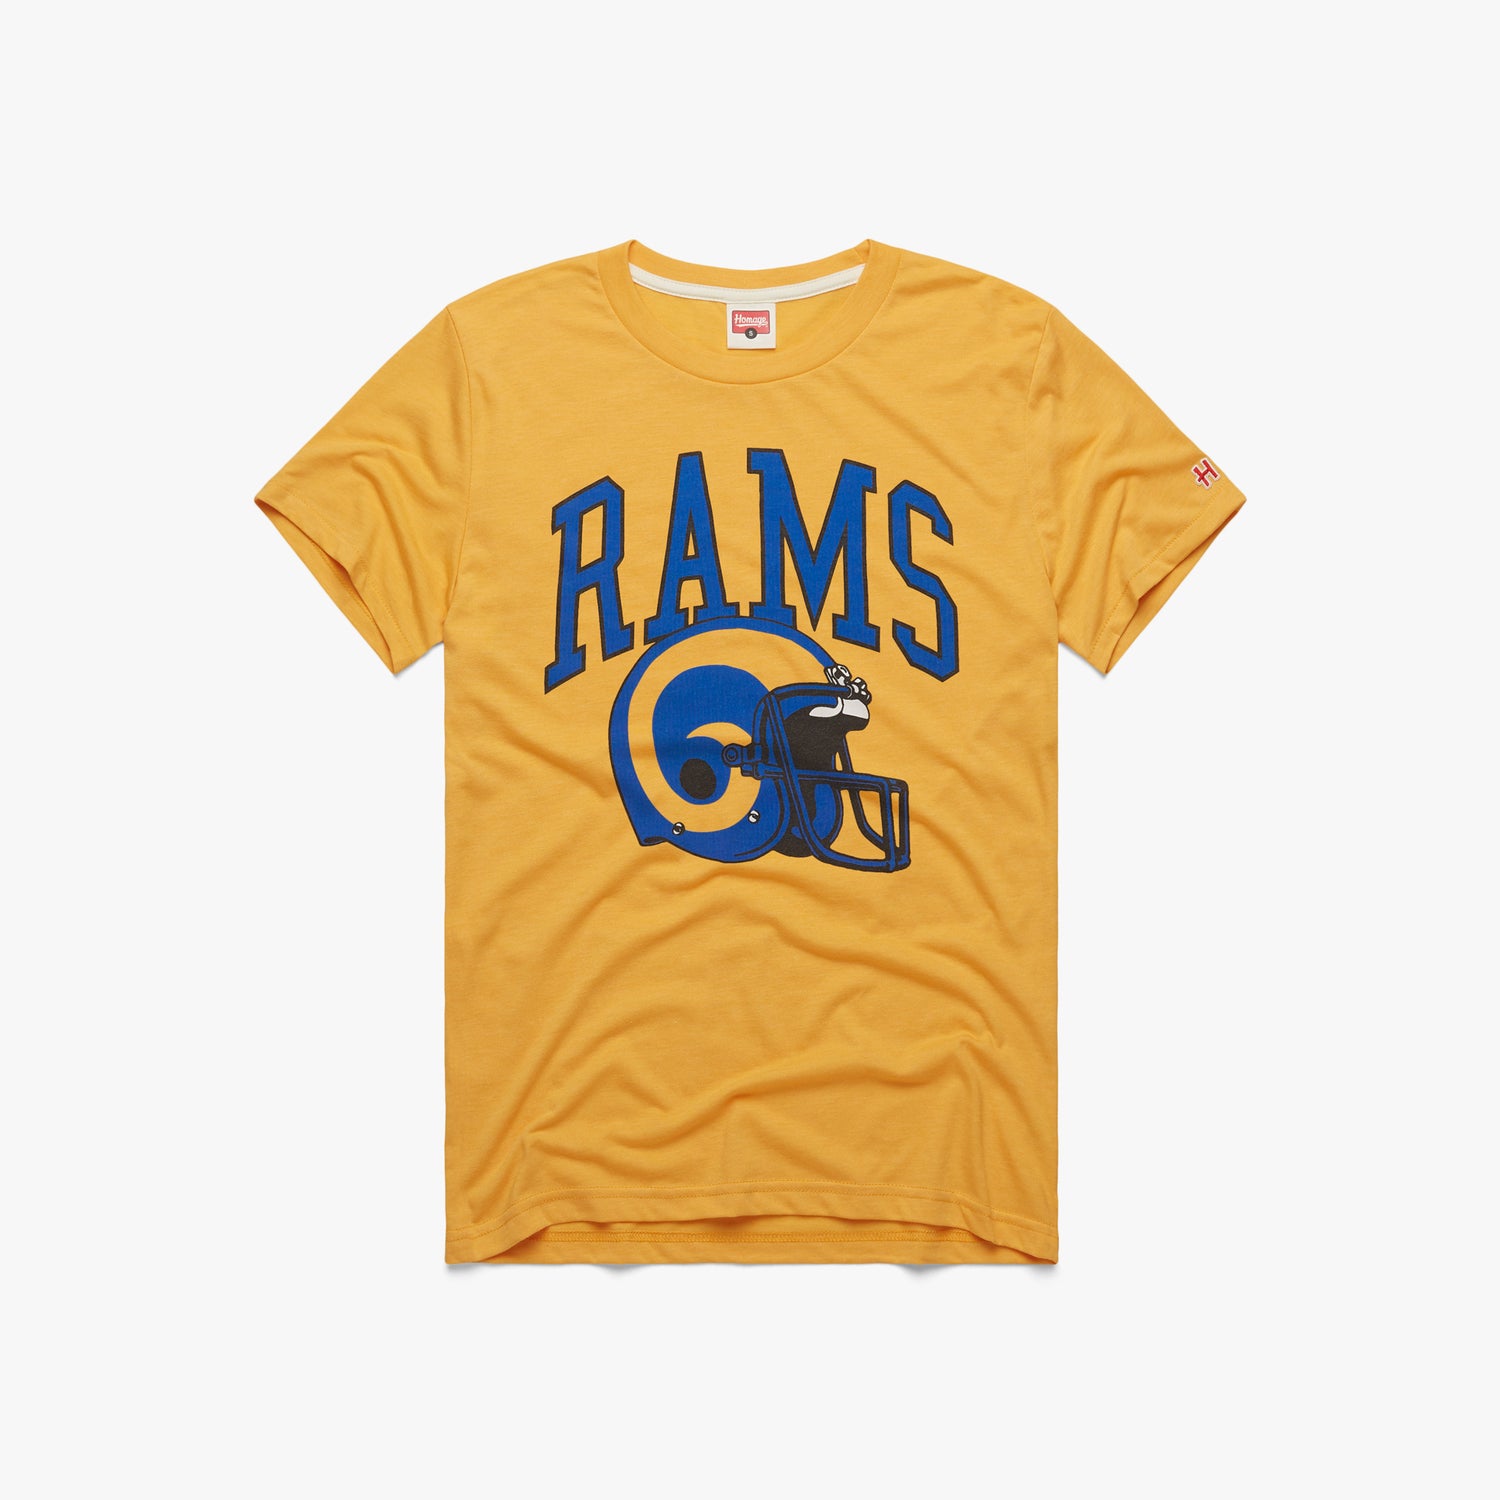 Los Angeles Rams - We want to see your vintage LA Rams gear